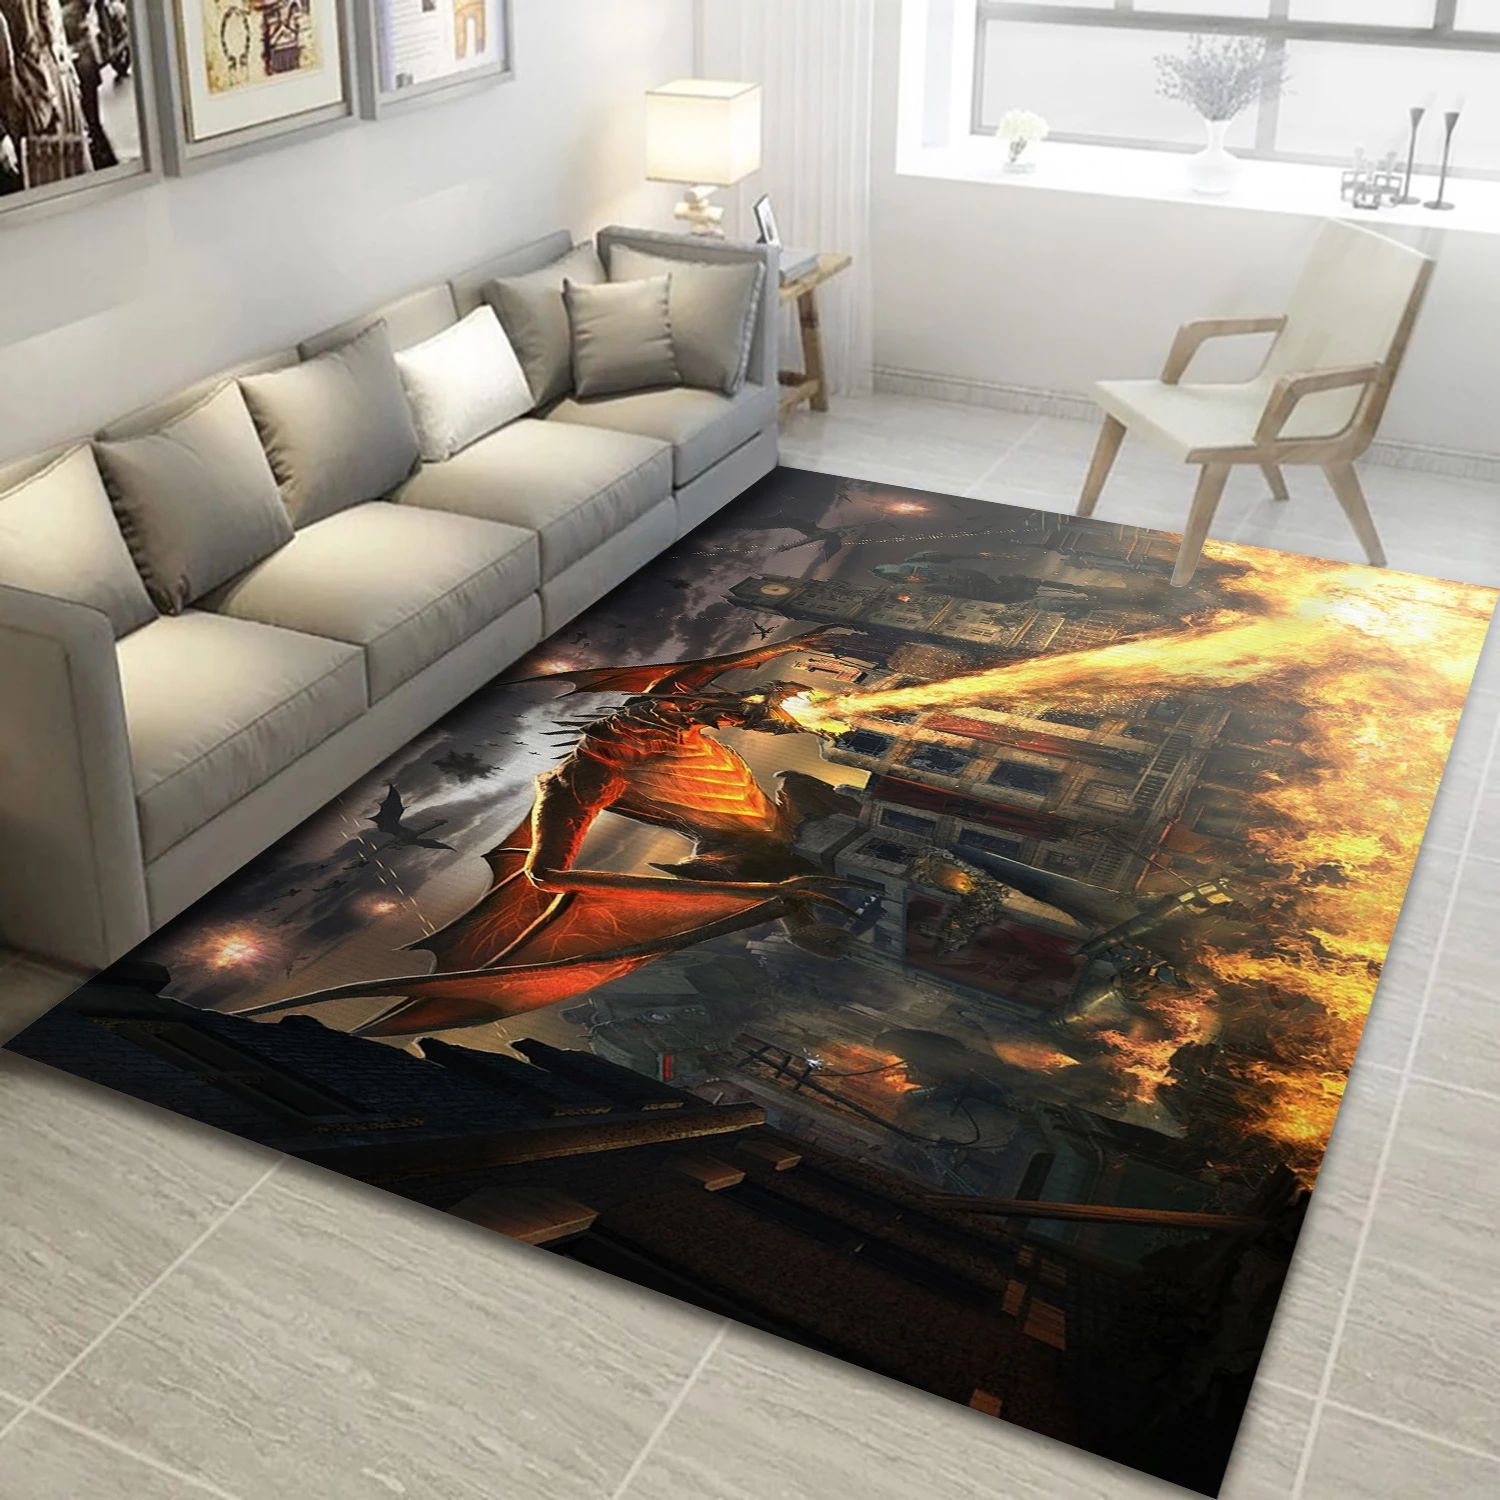 Call Of Duty Black Ops Iii Video Game Area Rug For Christmas, Living Room Rug - Home Decor Floor Decor - Indoor Outdoor Rugs